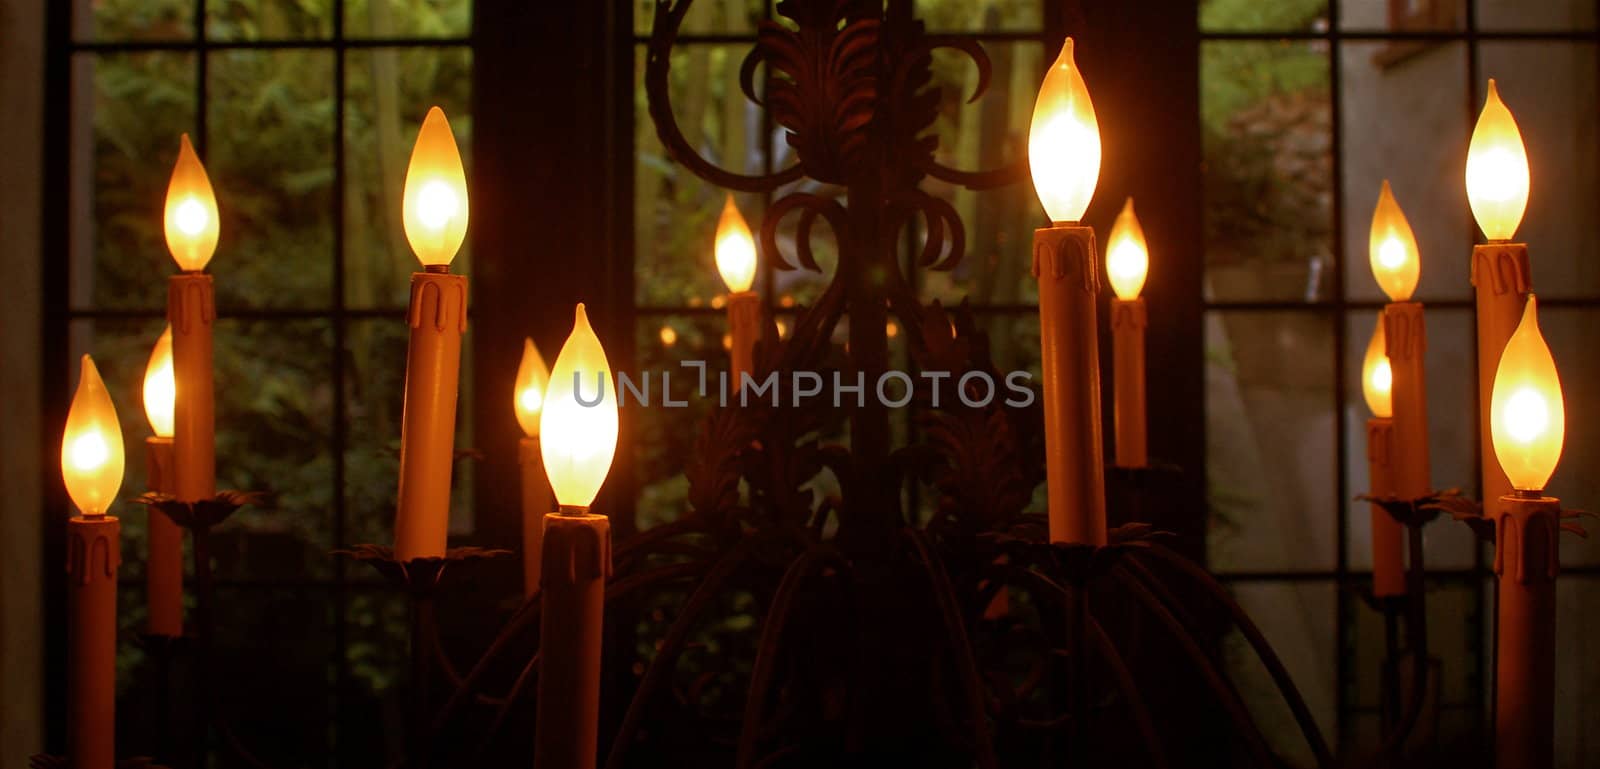 What appears to be numerous floating candles in front of an old fashioned, paned glass window